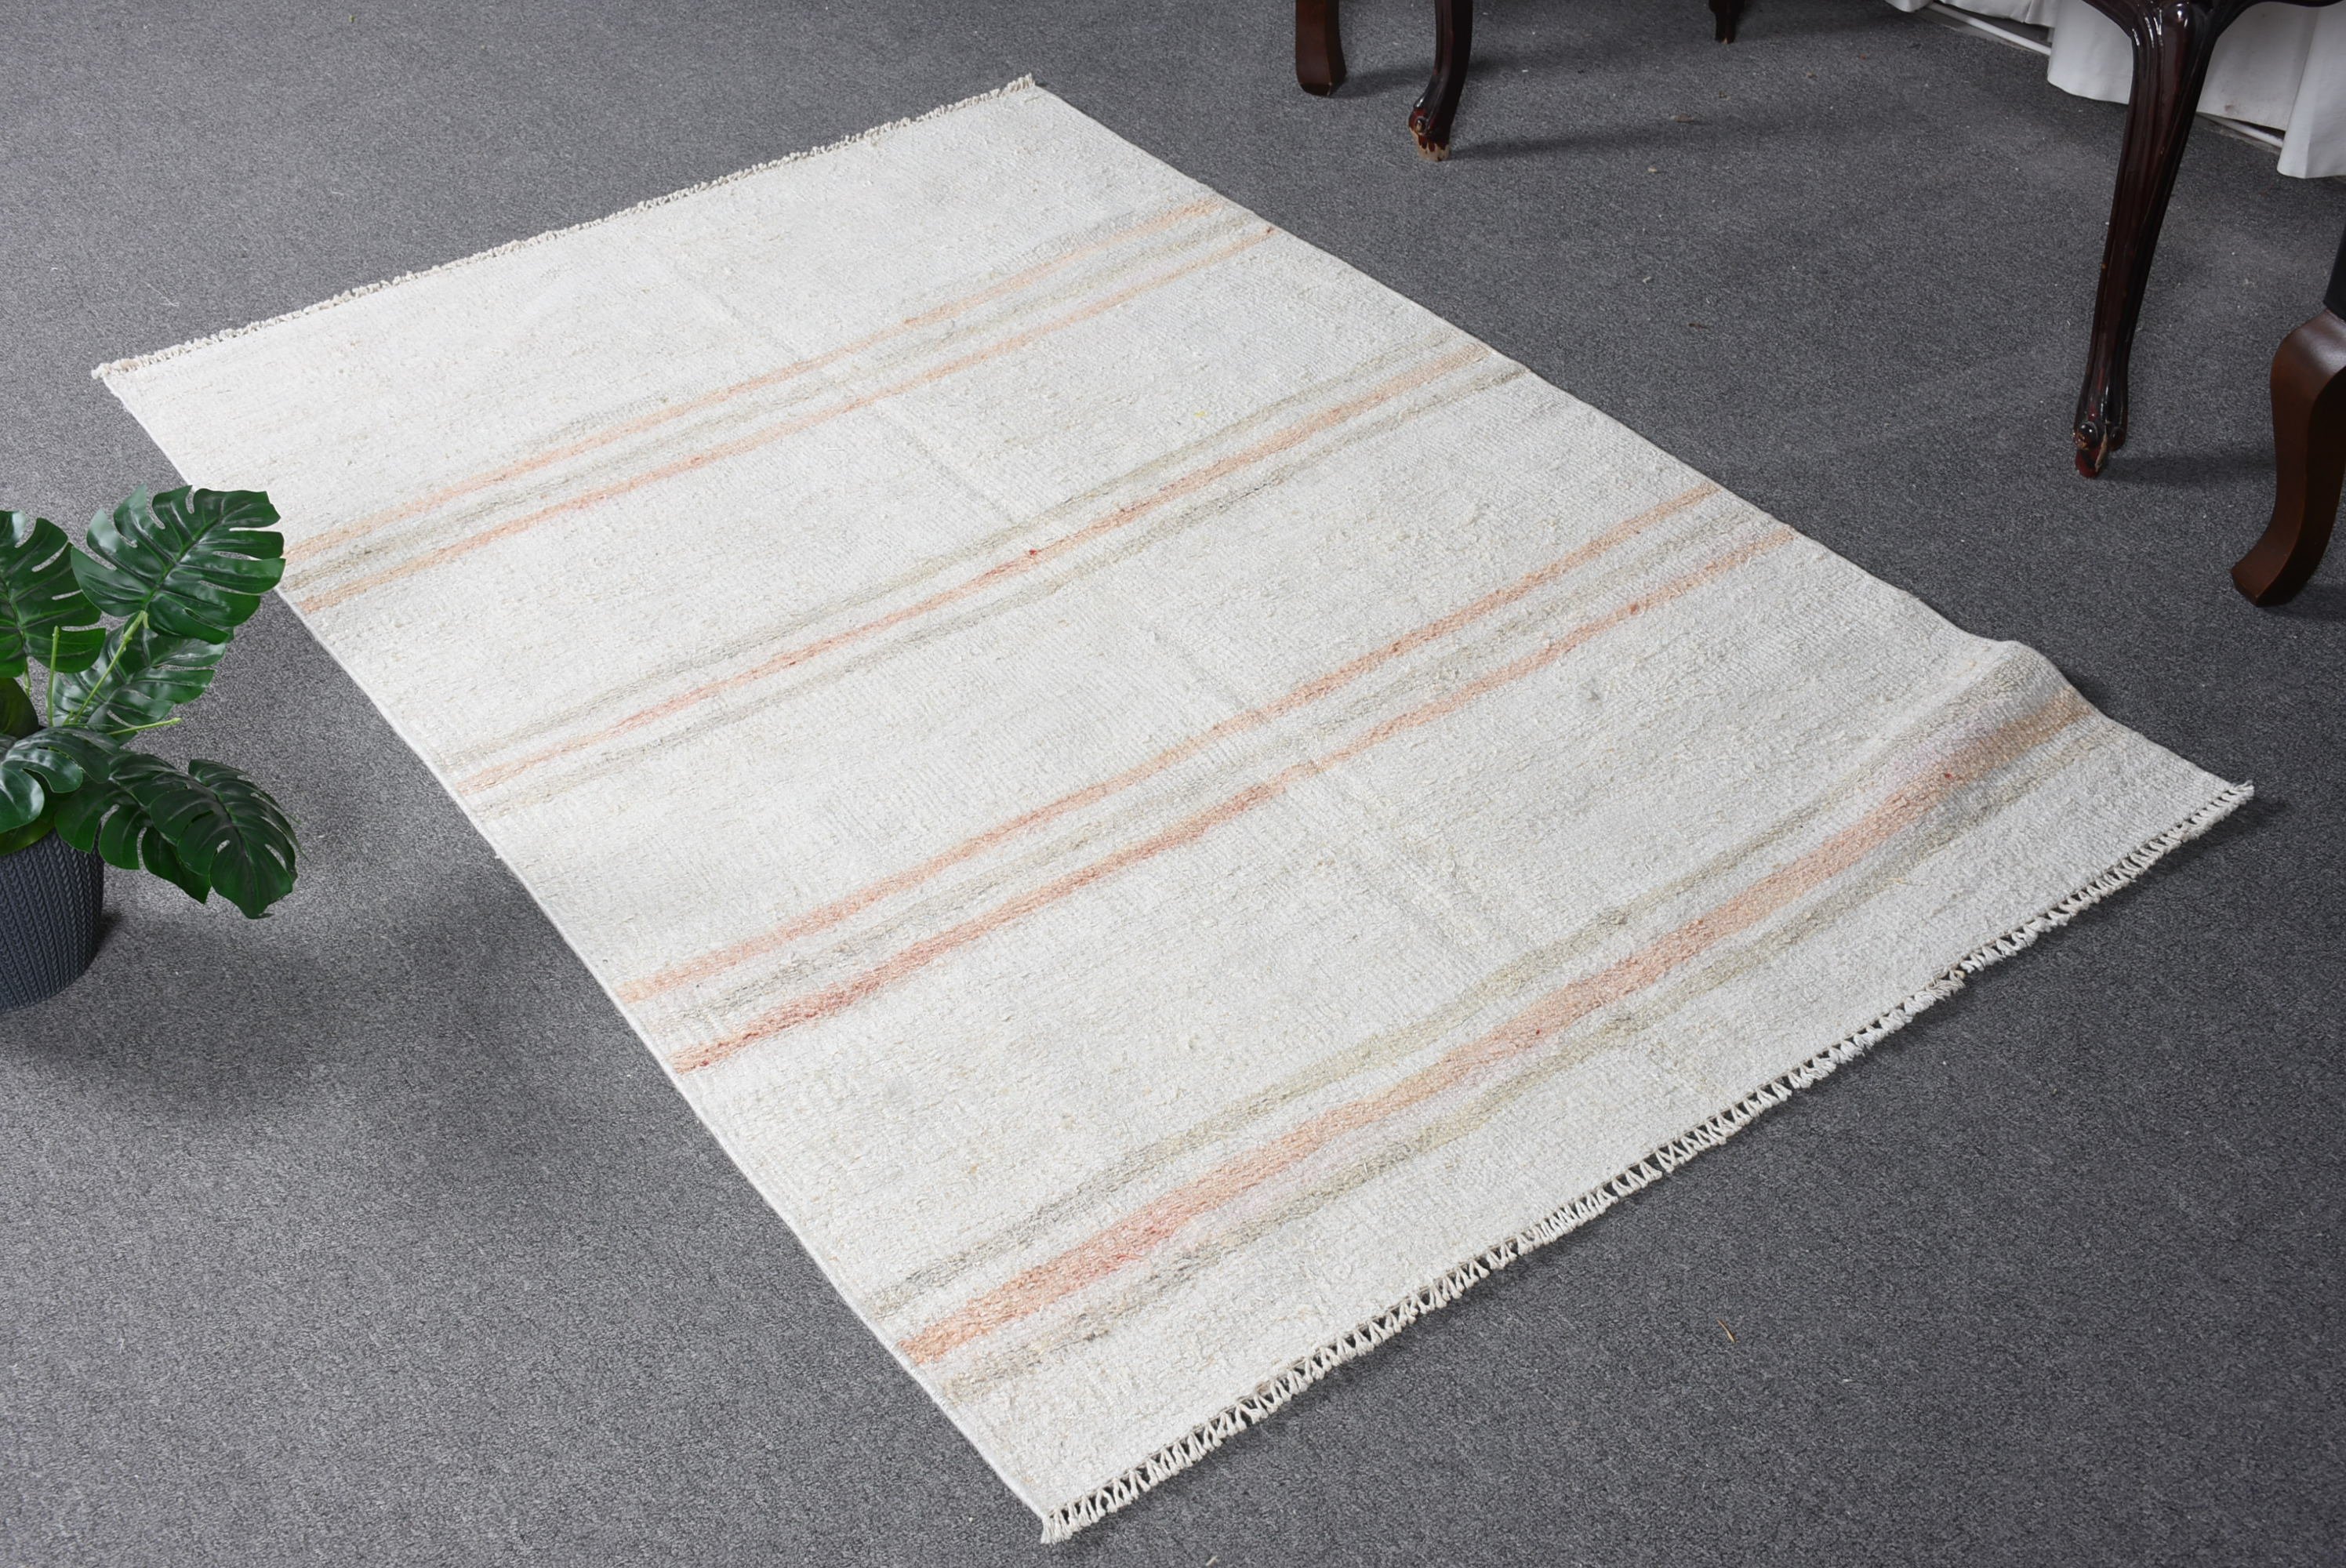 Entry Rug, Turkish Rug, Floor Rugs, White Moroccan Rug, 3.4x5.2 ft Accent Rug, Rugs for Entry, Vintage Rug, Kitchen Rug, Bedroom Rugs